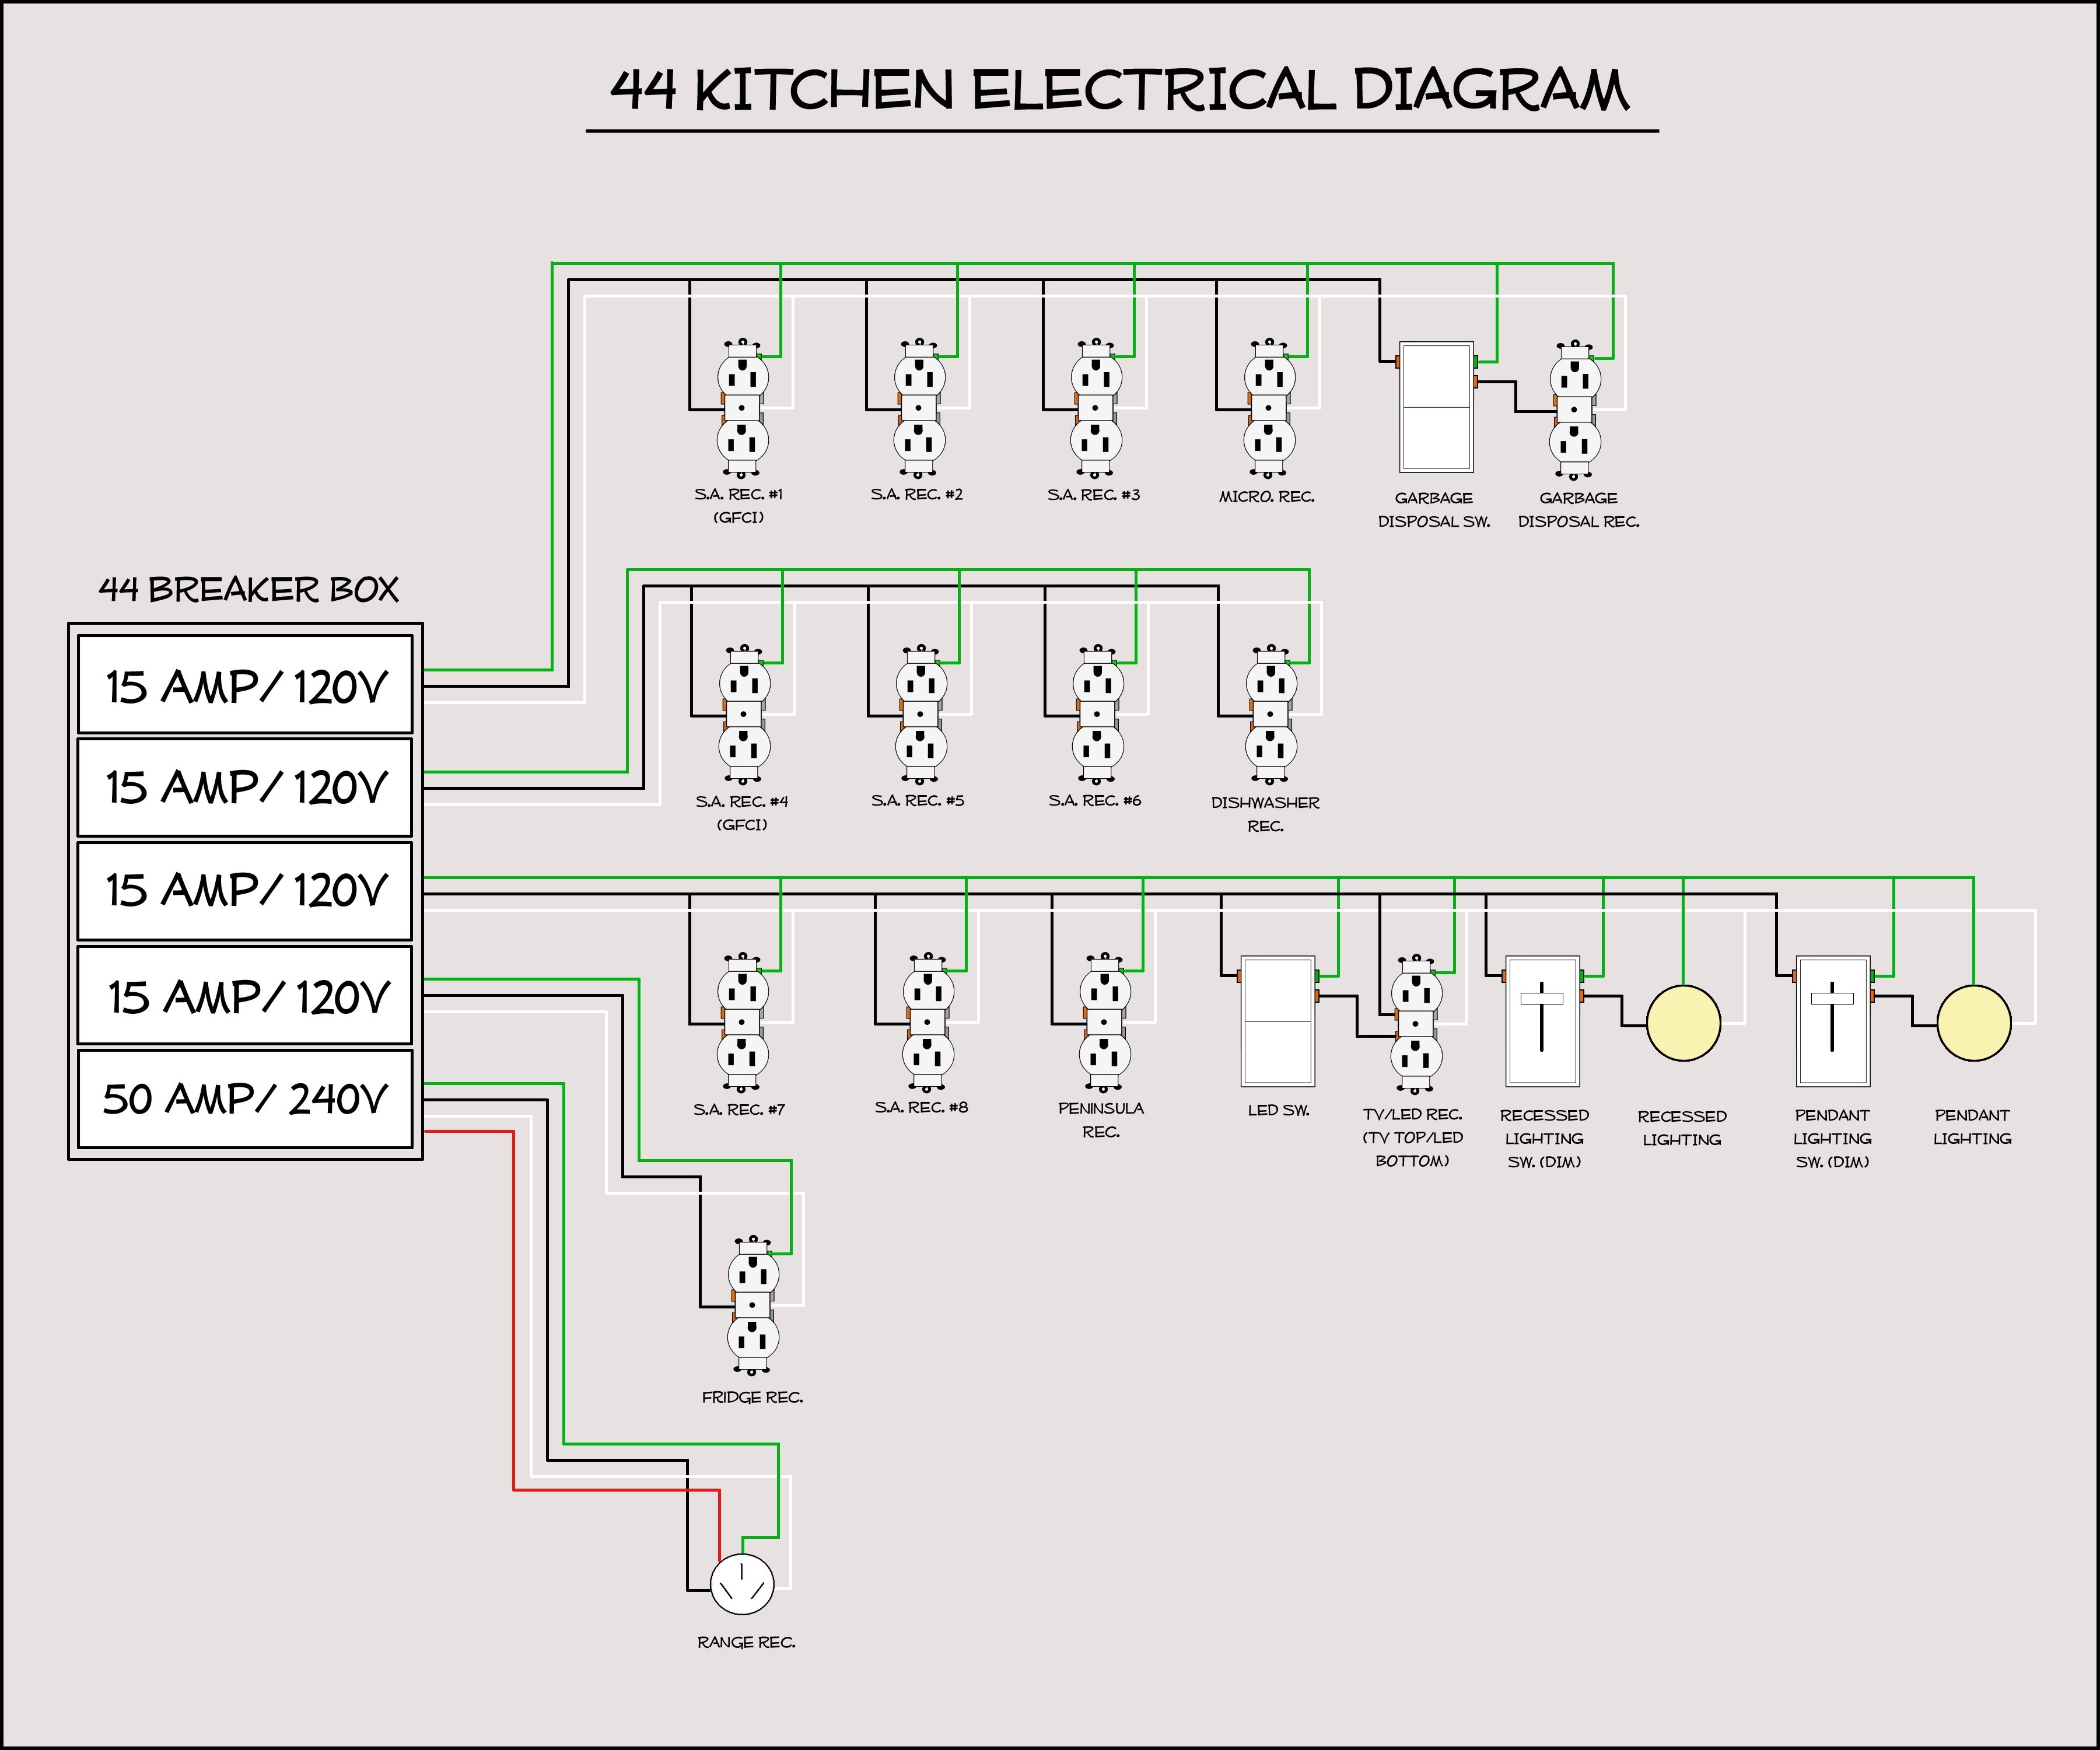 House Lighting Wiring Diagram Uk Best How To Wire Under Cabinet Lighting Diagram Lovely Kitchen Wiring